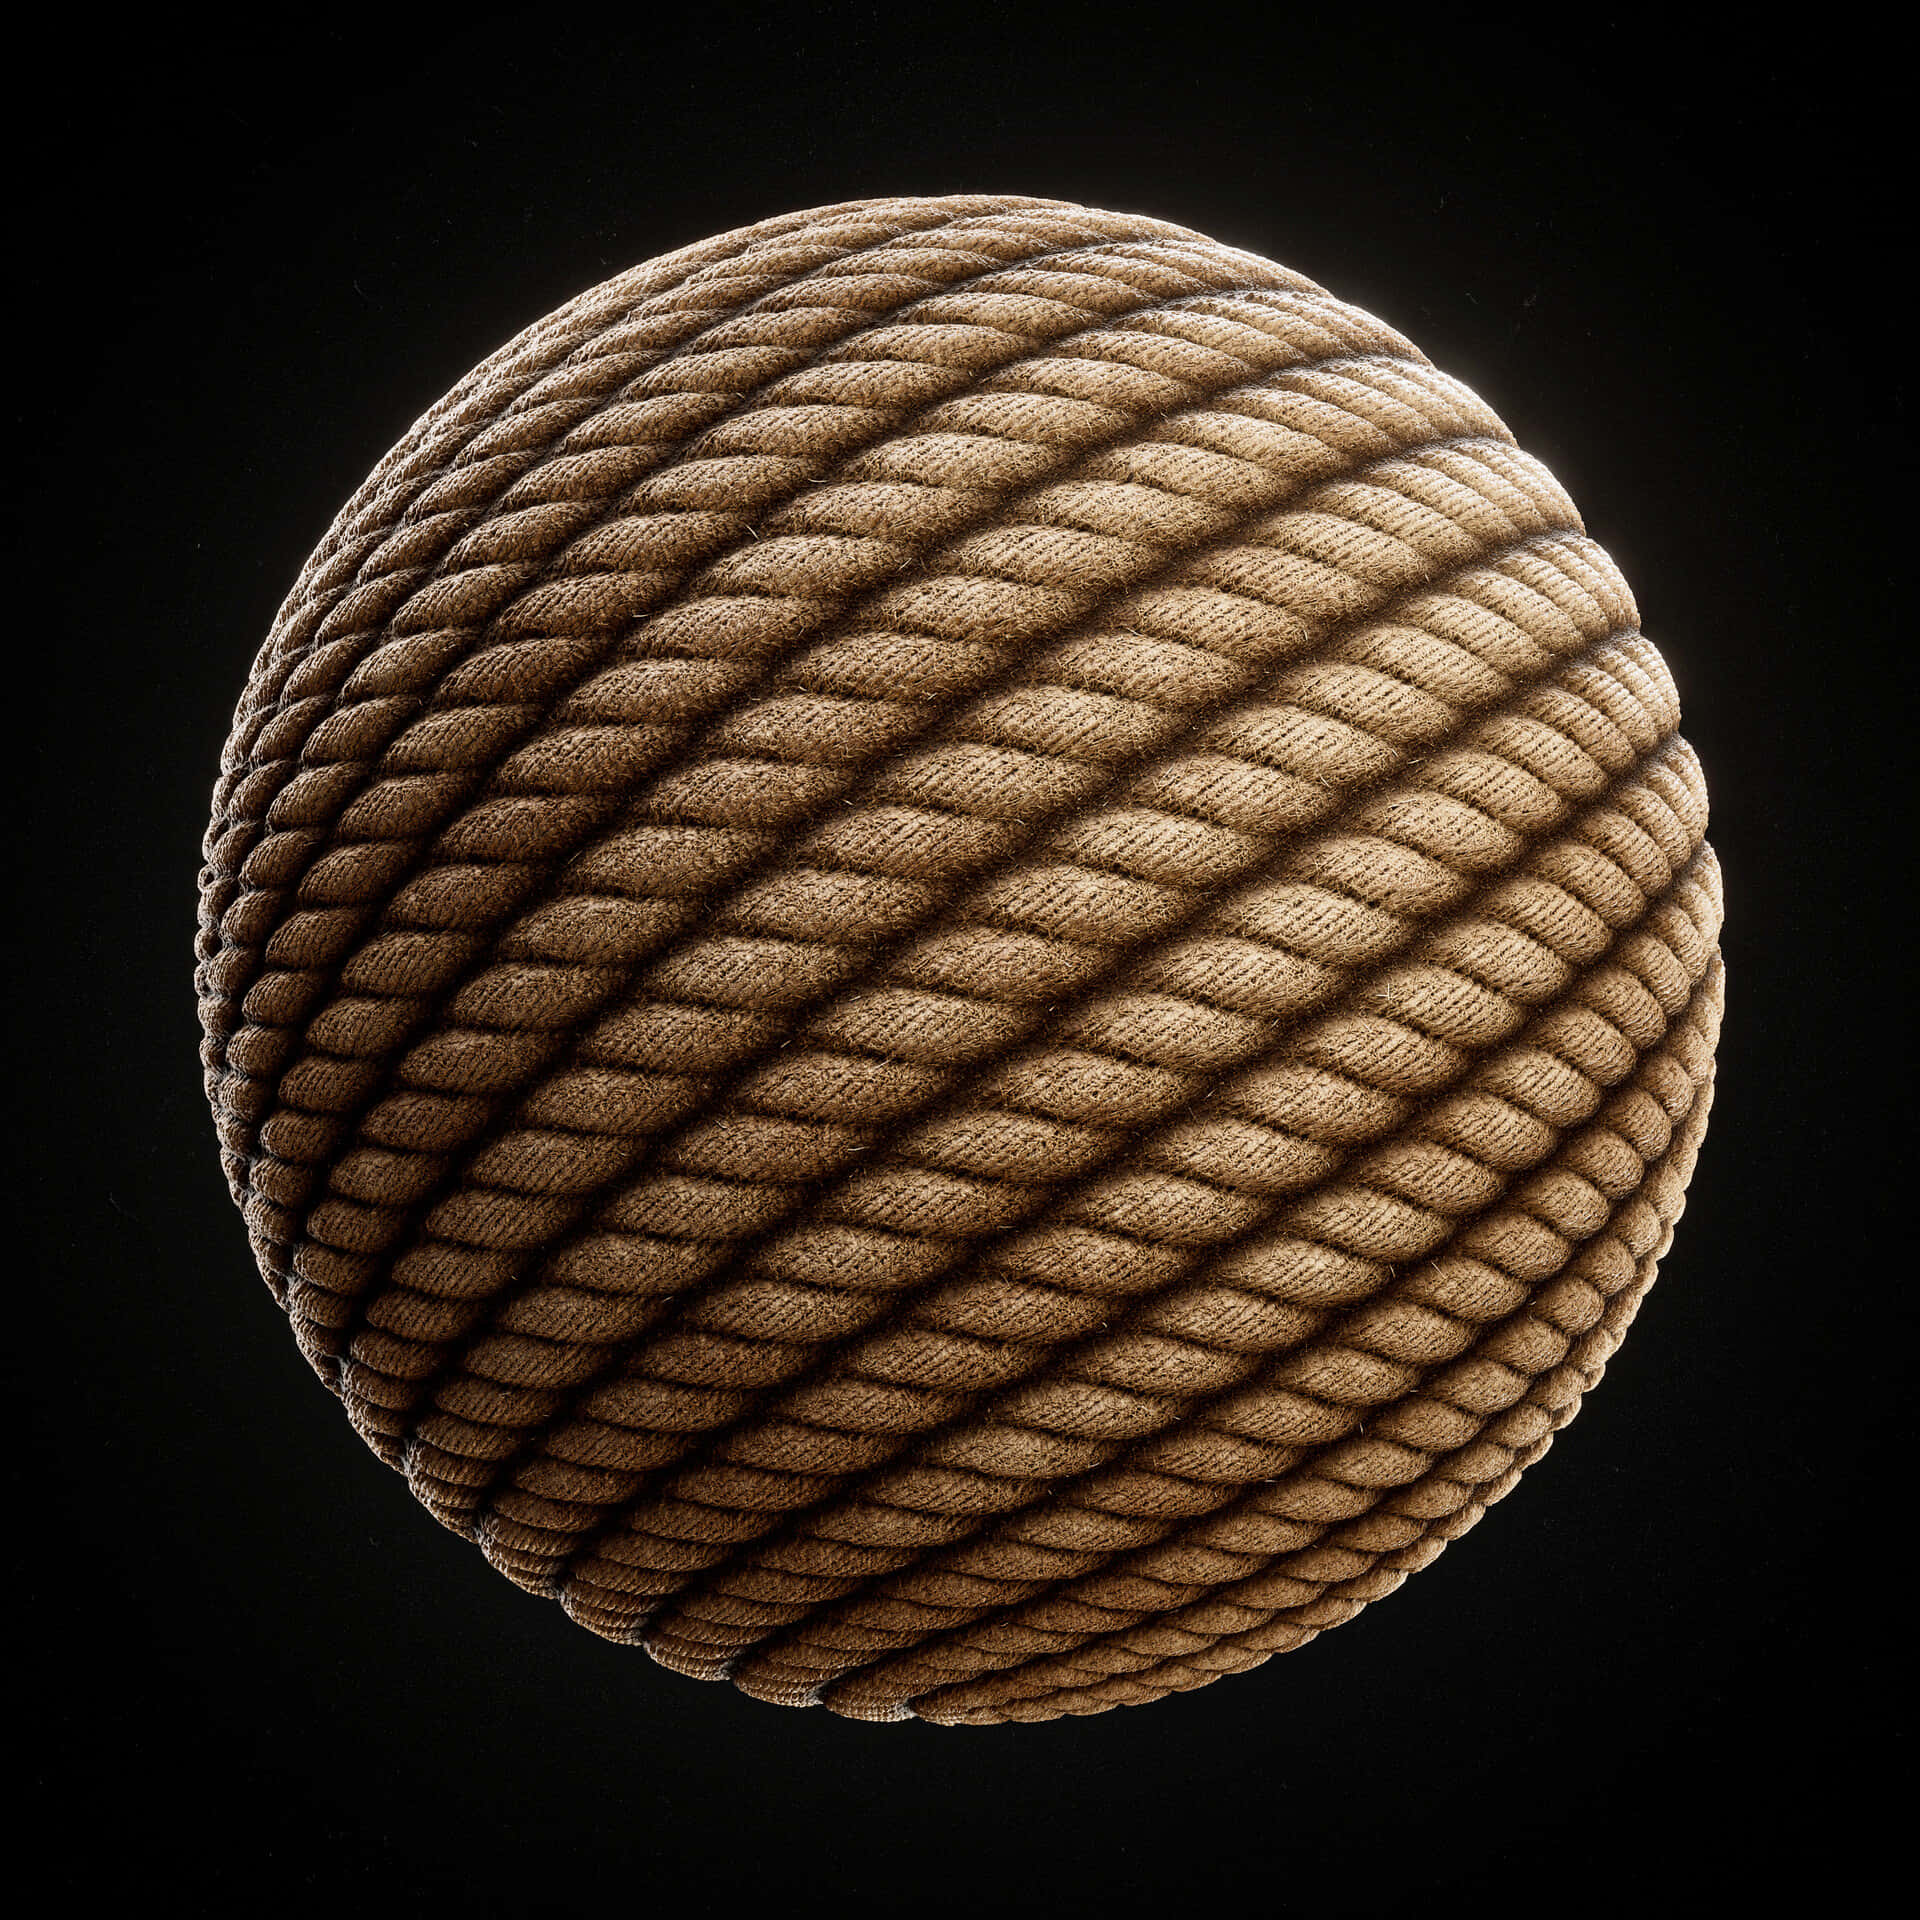 Caption: Strength in Simplicity - A Close-up of Coiled Rope